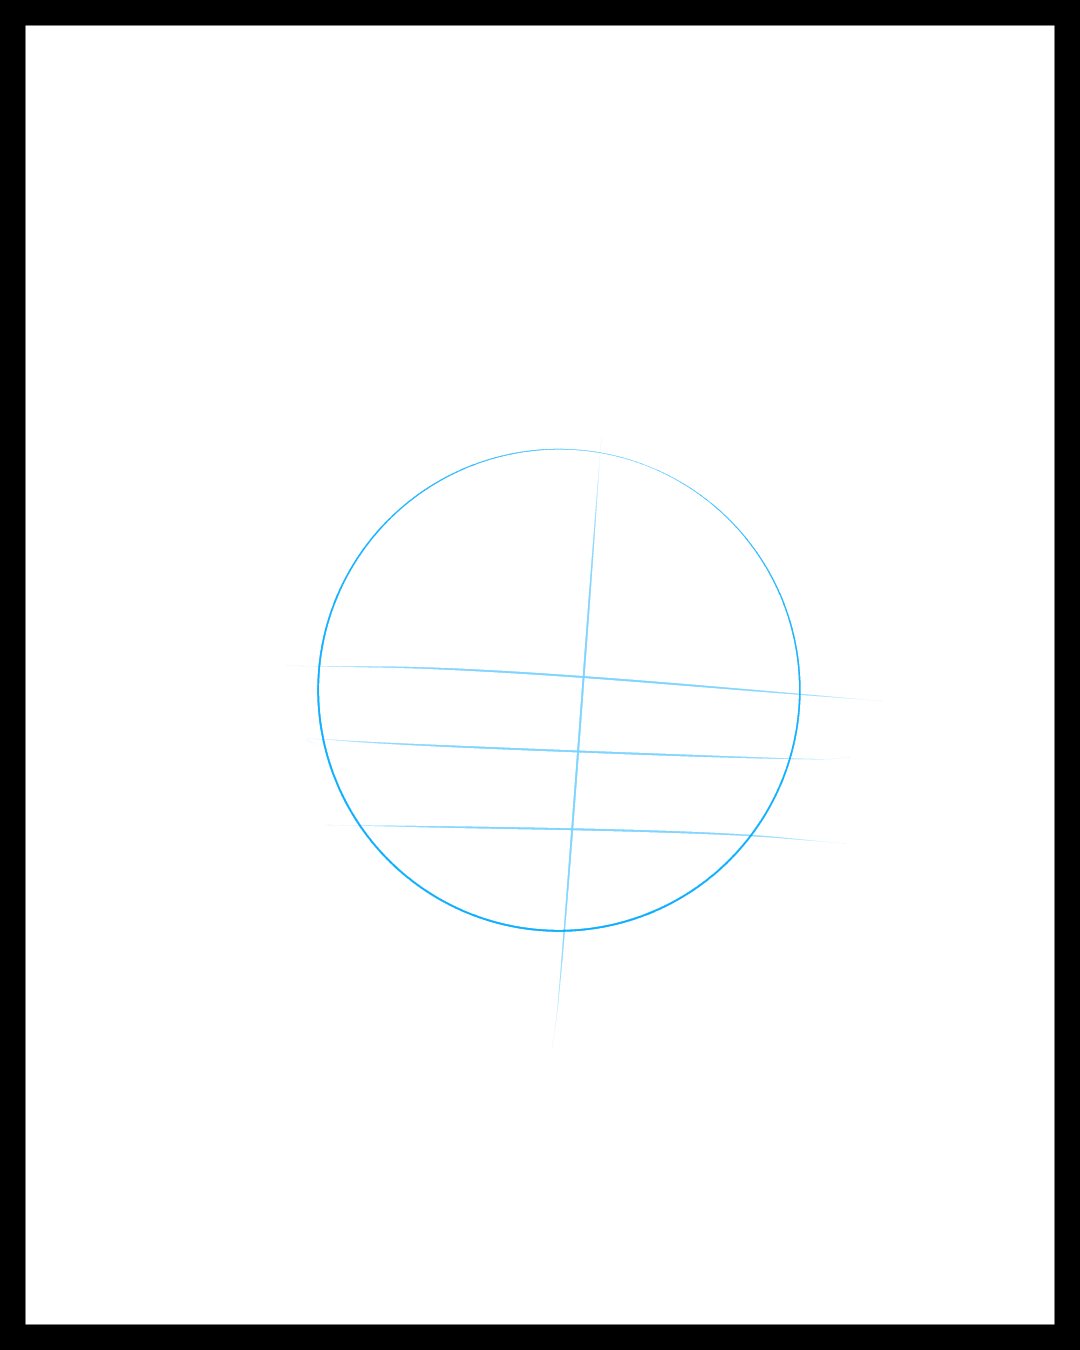 Step 2 (Draw lines in the circle)